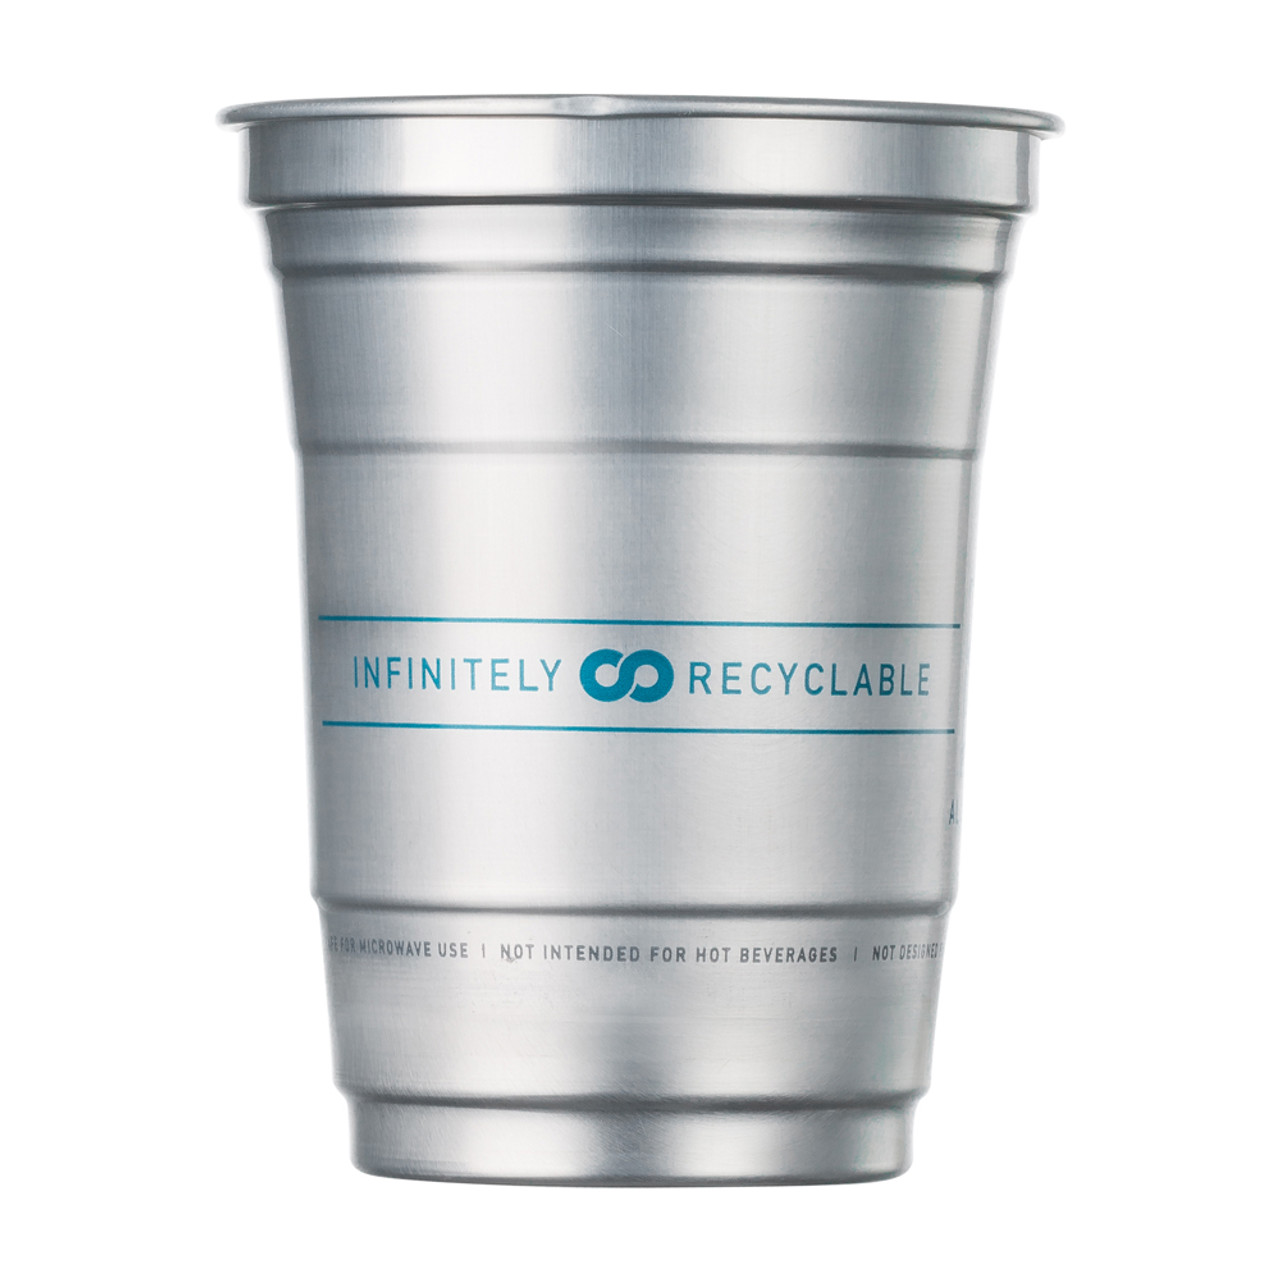 https://cdn11.bigcommerce.com/s-cznxq08r7/images/stencil/1280x1280/products/5020/13920/730170-Ball-Aluminum-Drink-Cups-The-Ultimate-100-Recyclable-Cold-Drink-Cup-16-oz-24-Pack-4__14342.1628540590.jpg?c=1